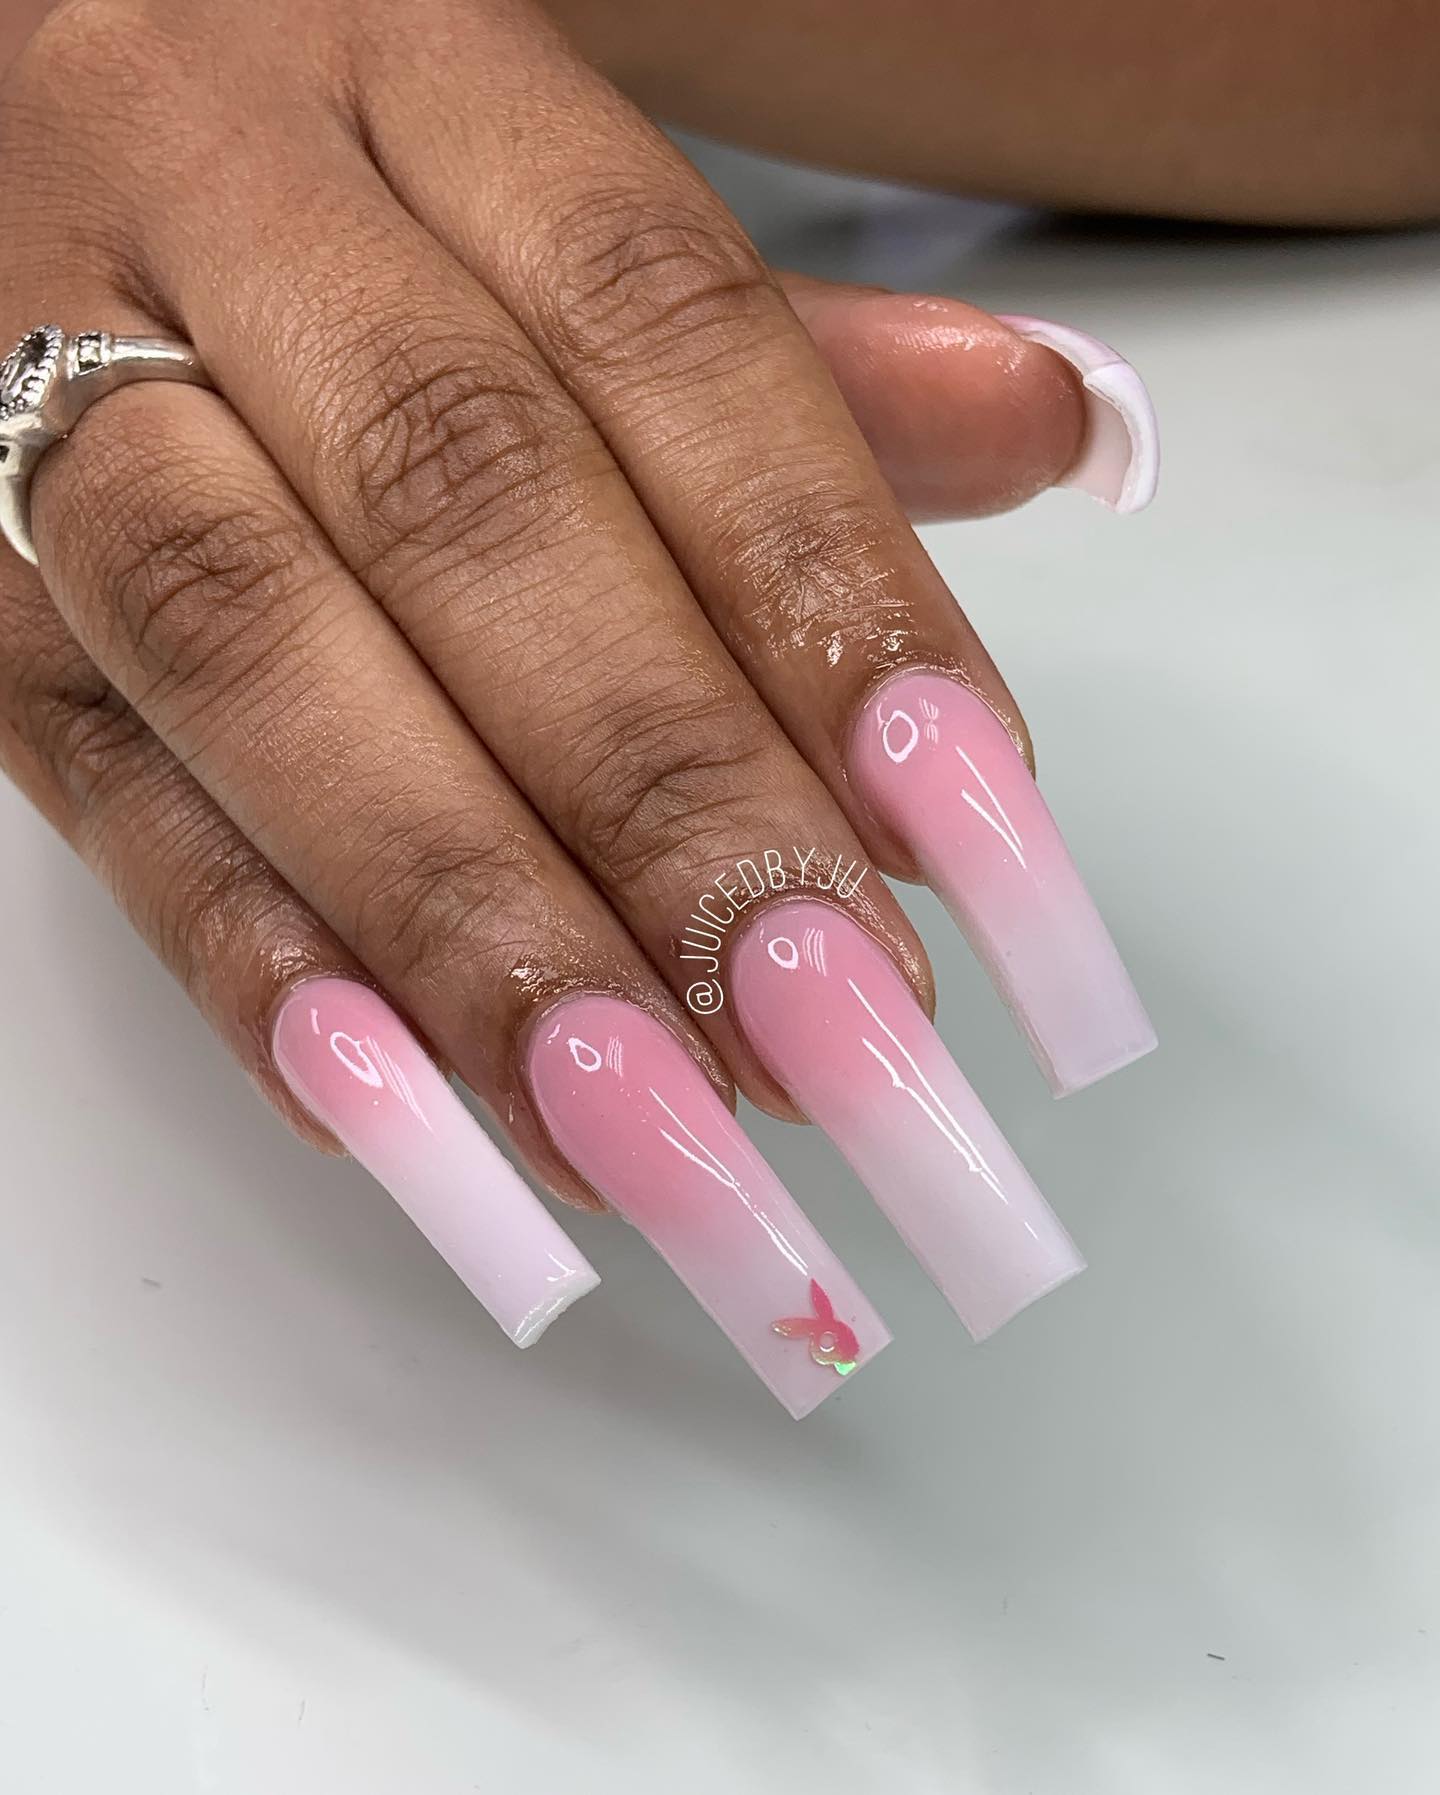 A thick and long acrylic nail shows off your personality a lot but there is always something you can add to your nail design. Go for a baby pink and white ombre nails and stick a playboy bunny nail sticker to your ring finger.